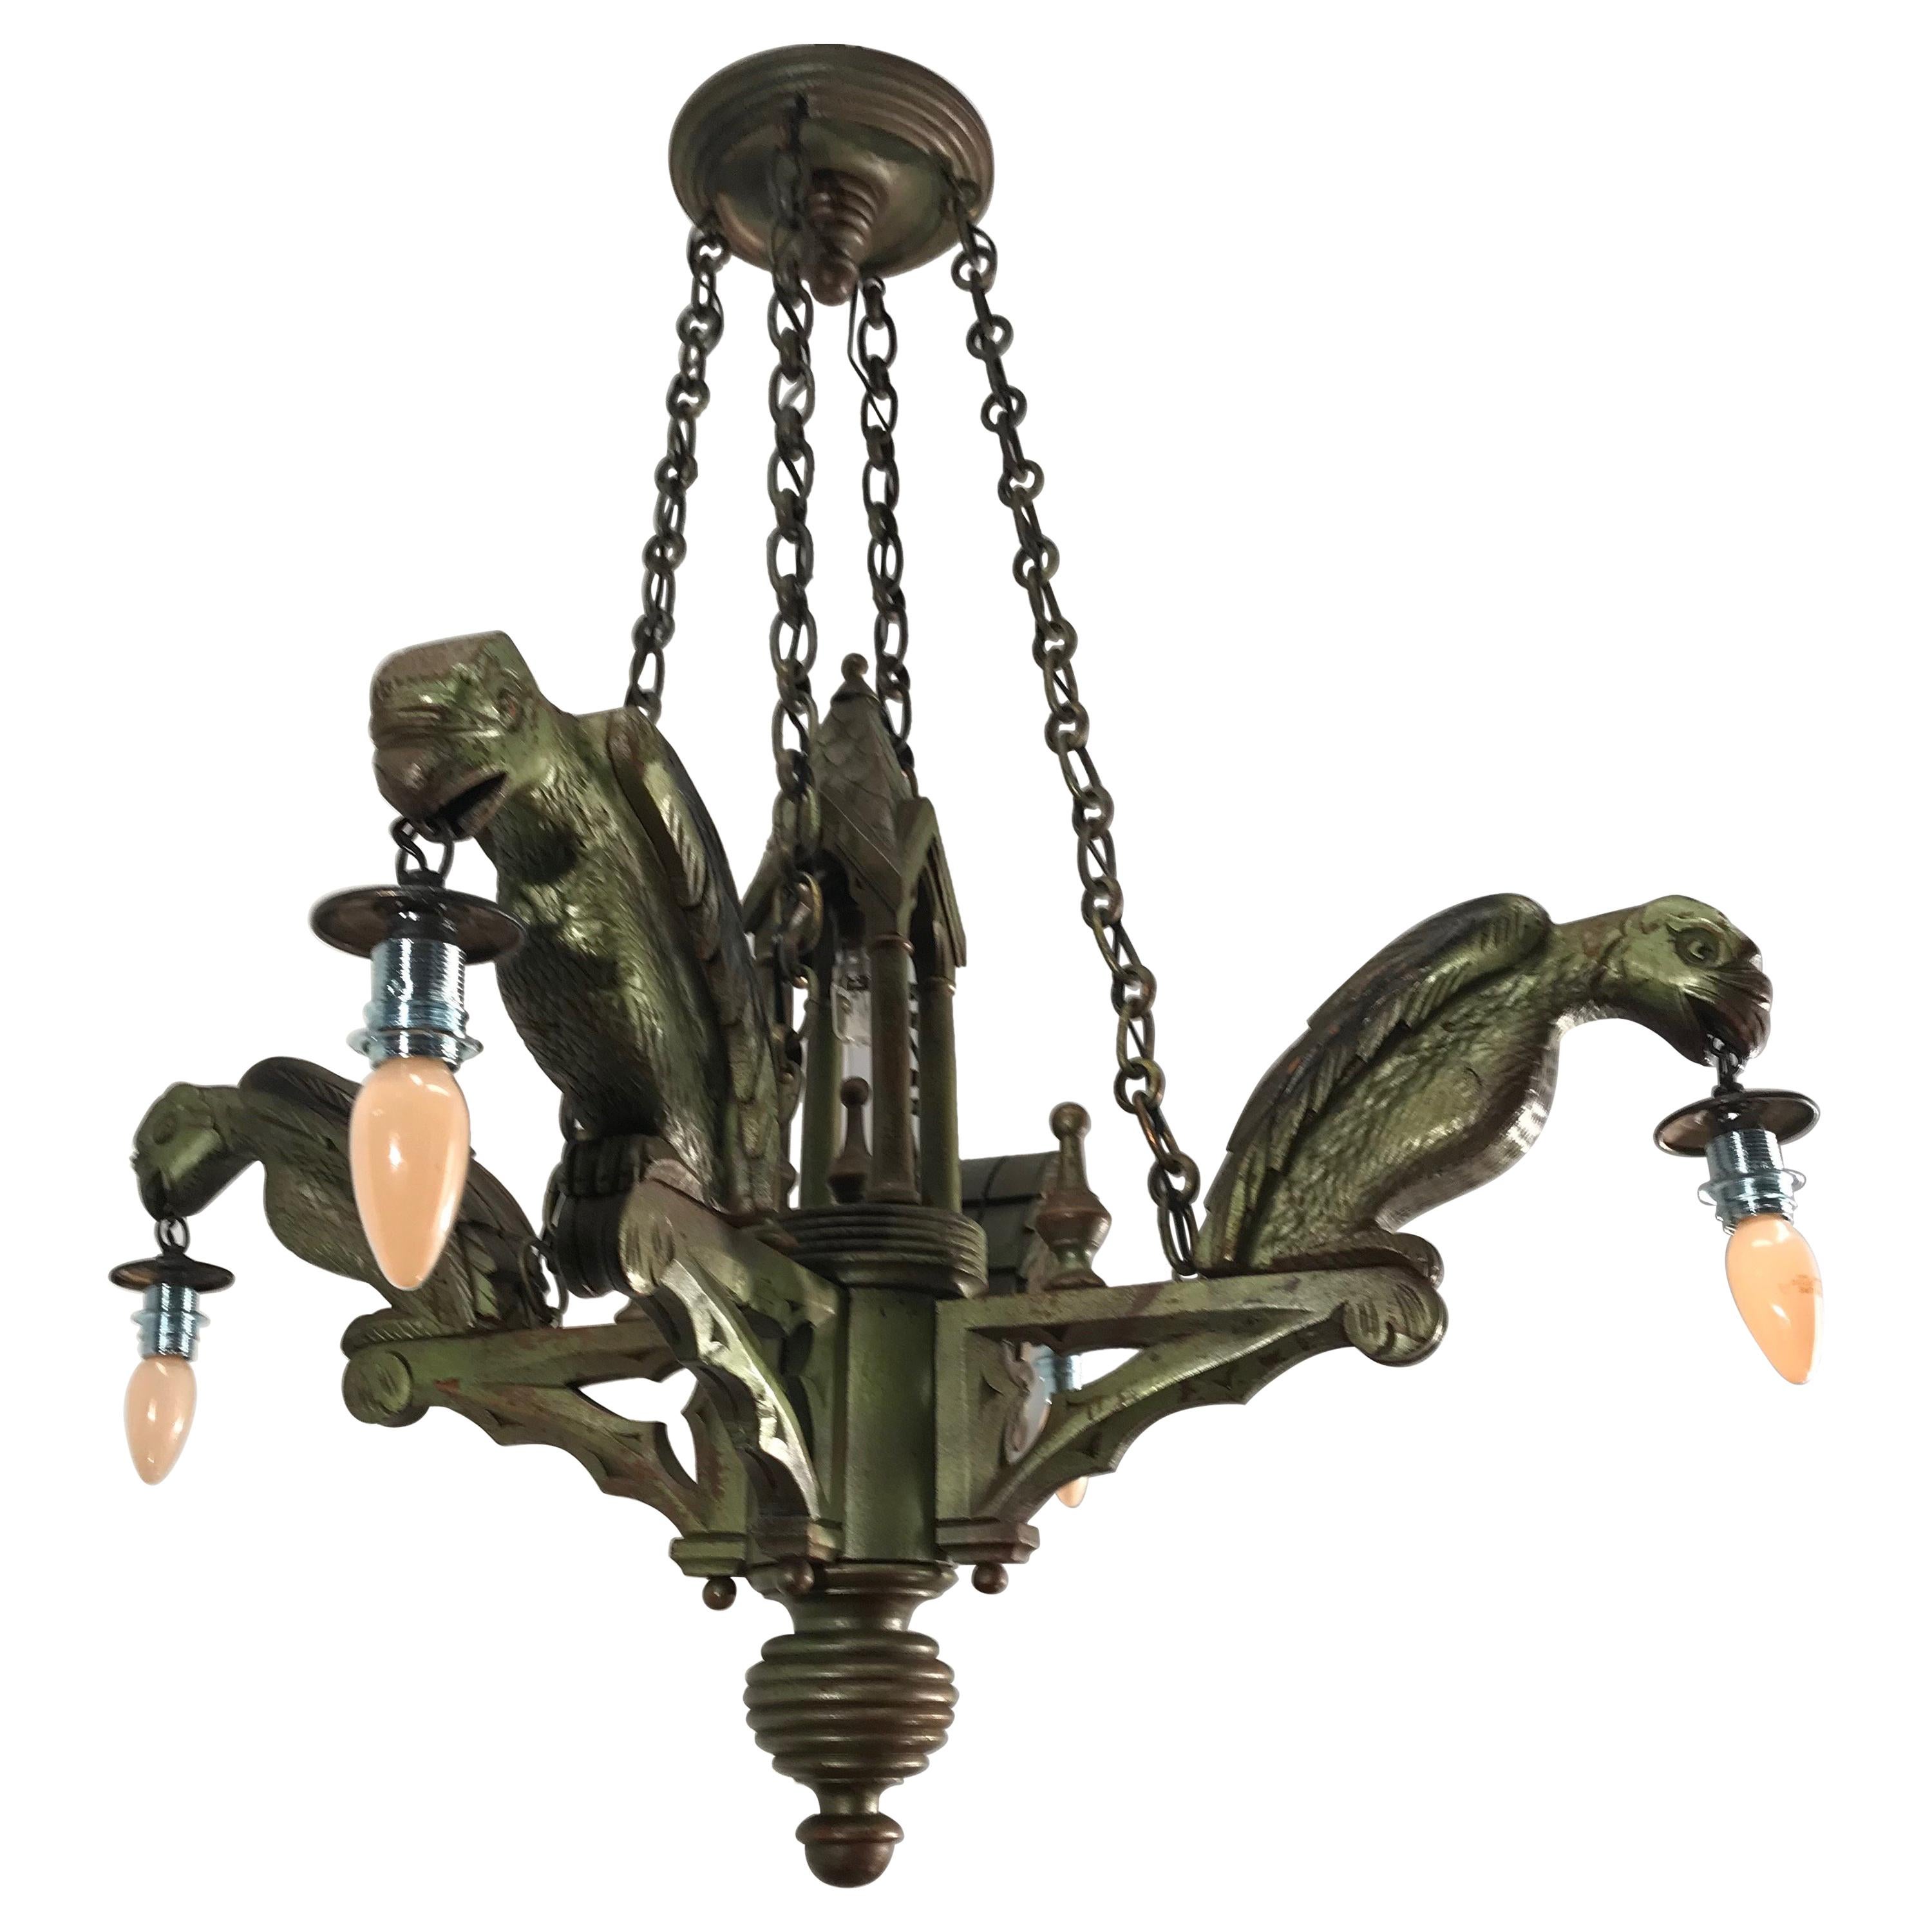 Rare Hand Carved Wooden Gothic Revival Art Chandelier with Gargoyle Sculptures